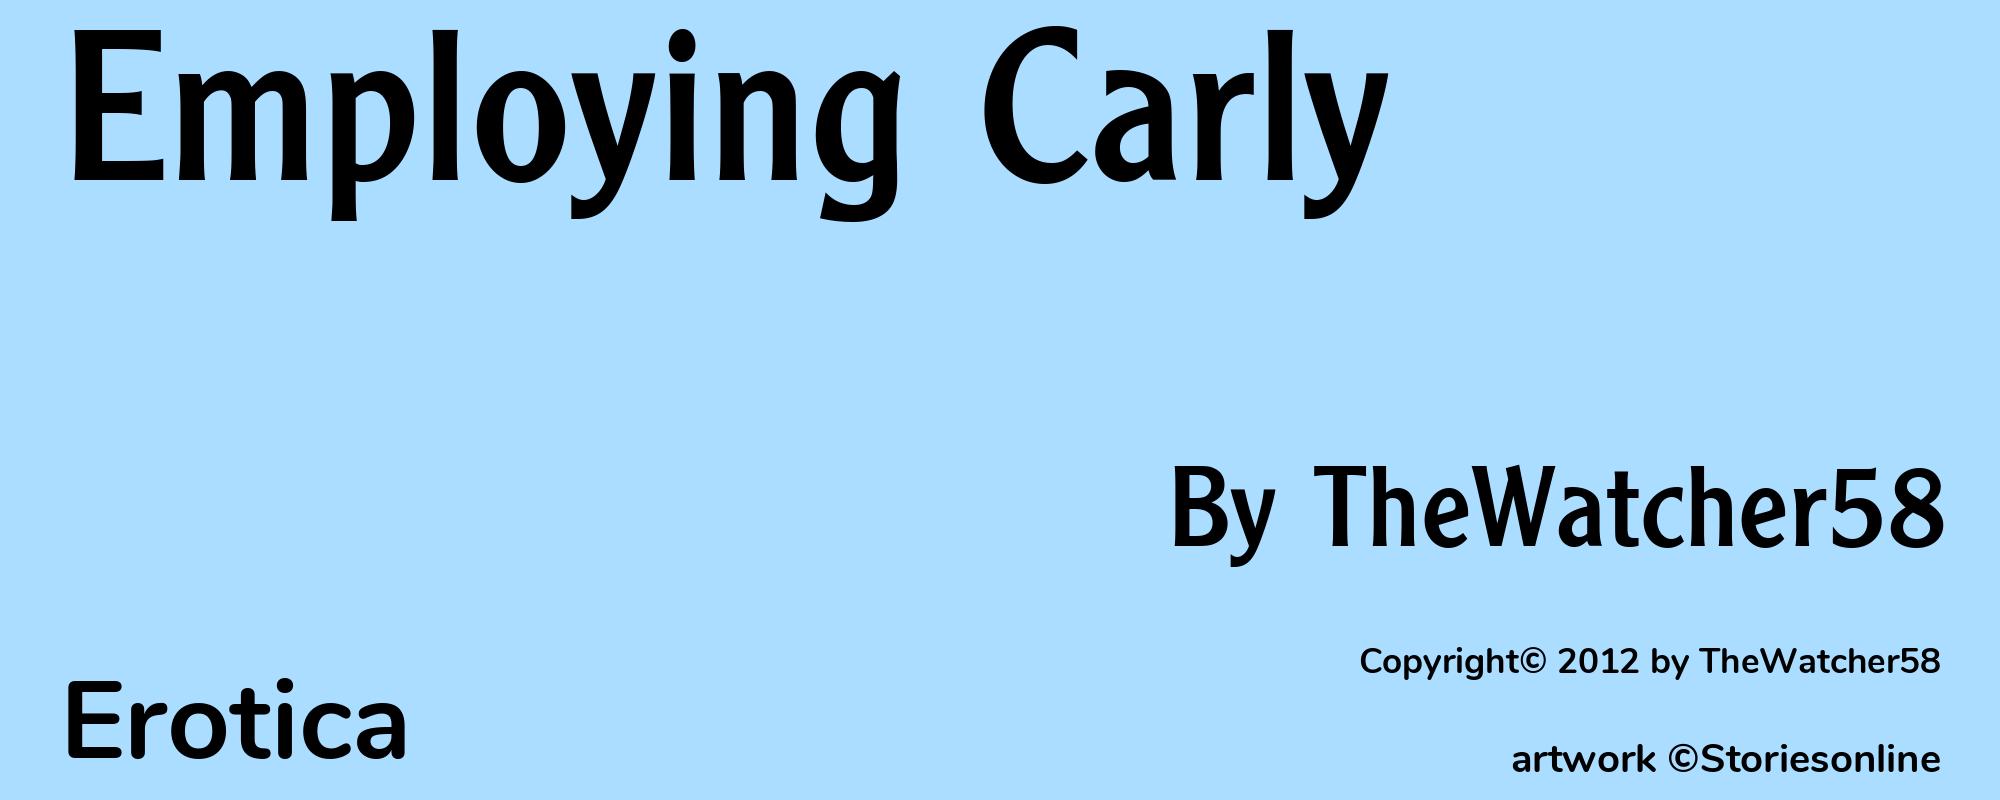 Employing Carly - Cover